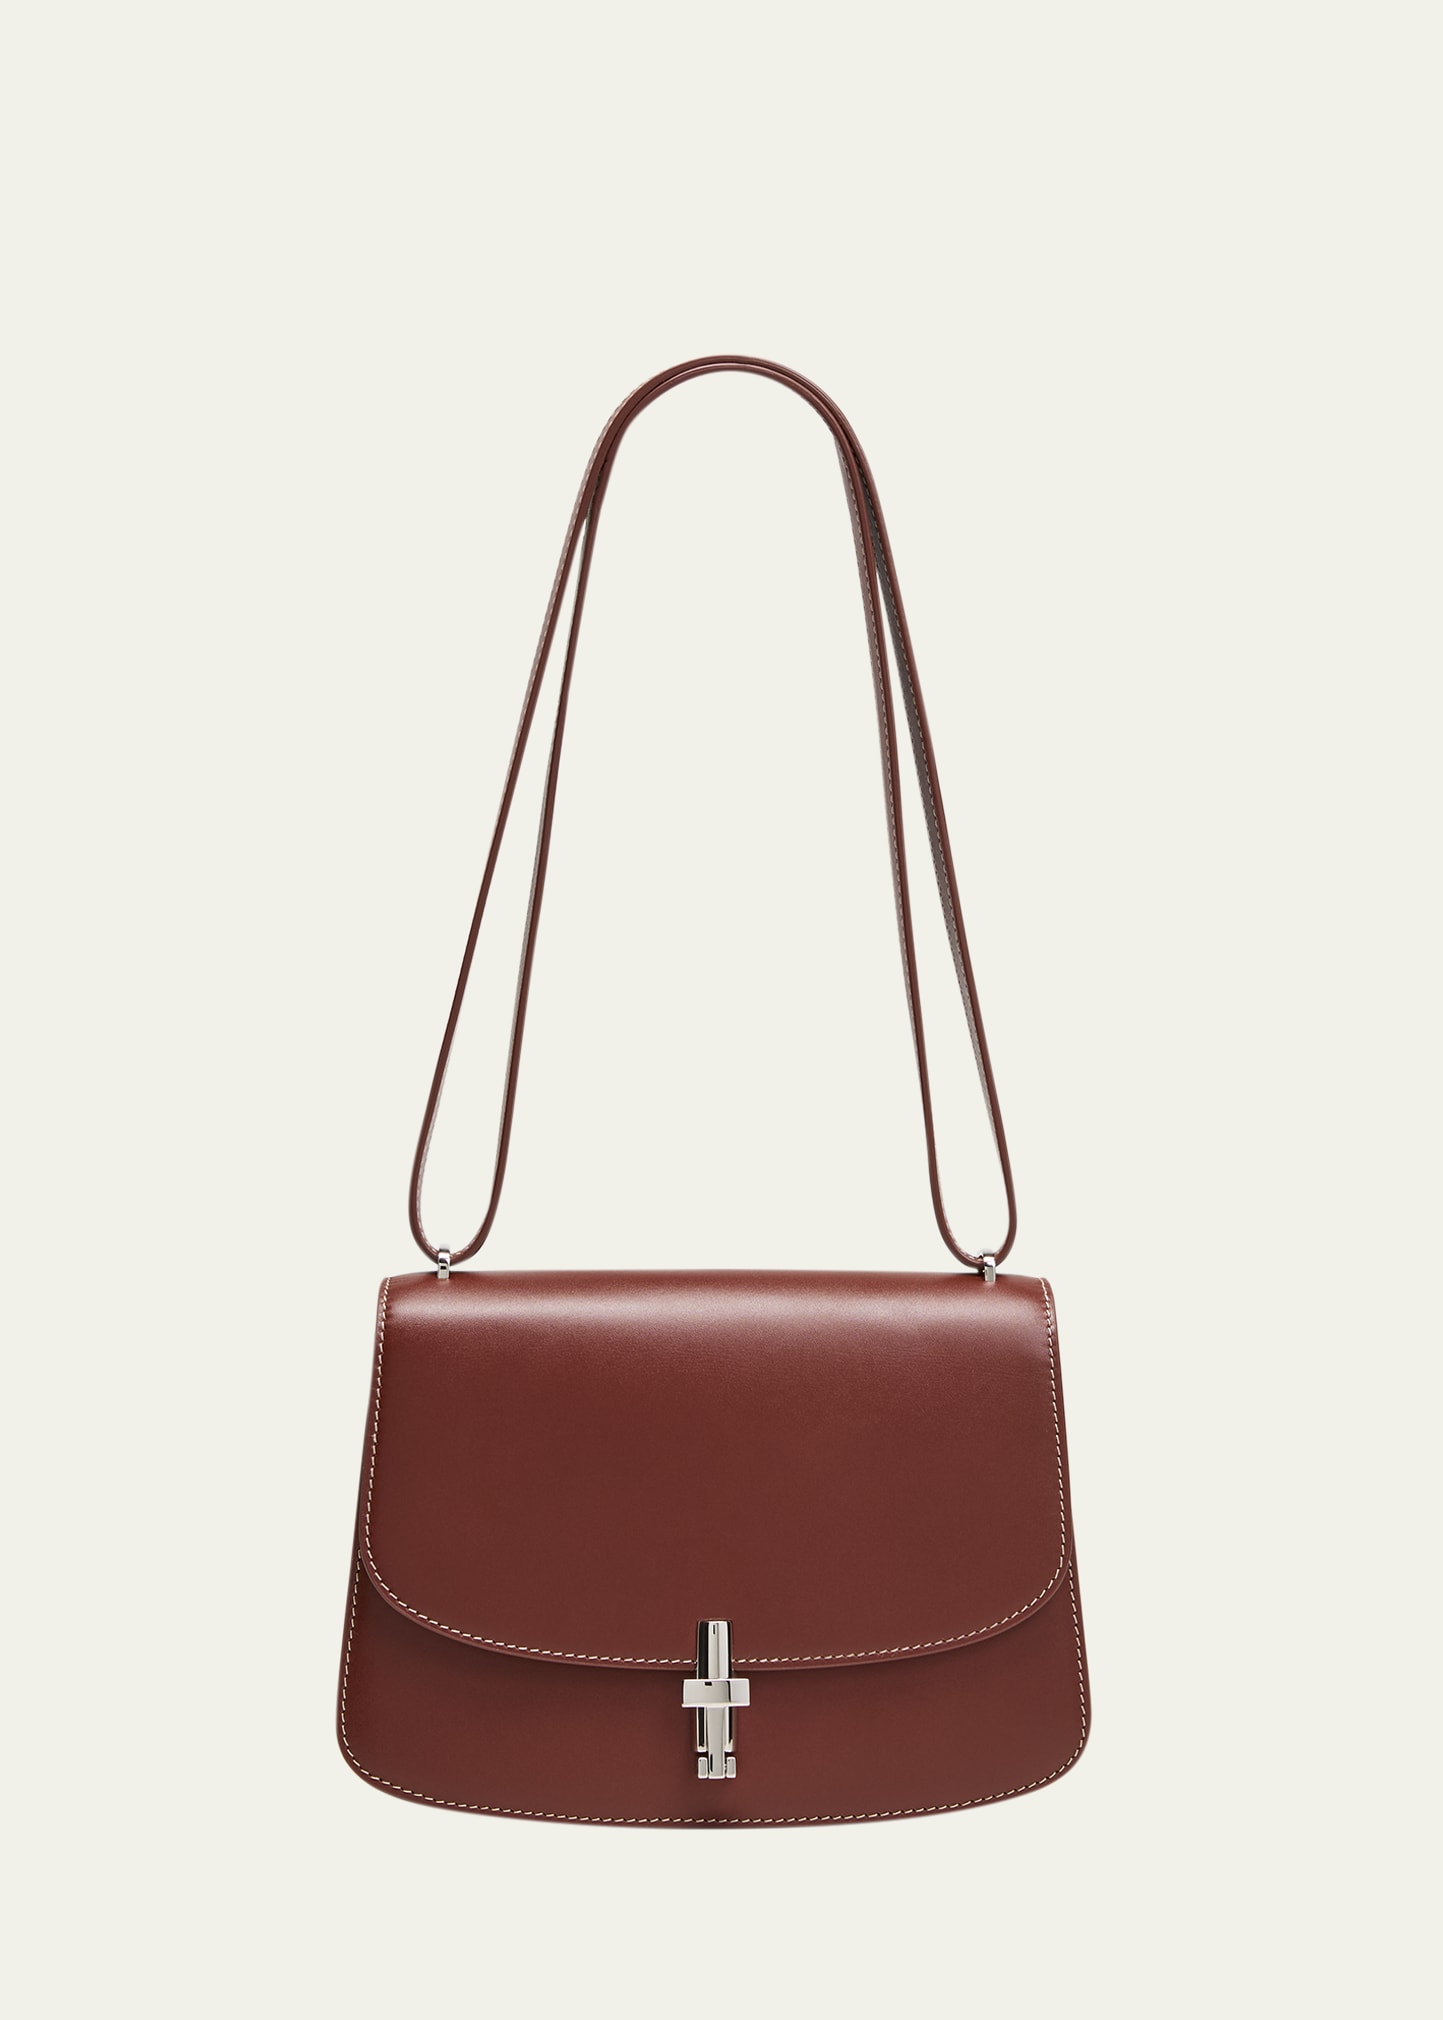 The Row Sofia Saddle Crossbody Bag In Box Leather In Chywd Cherry Wood